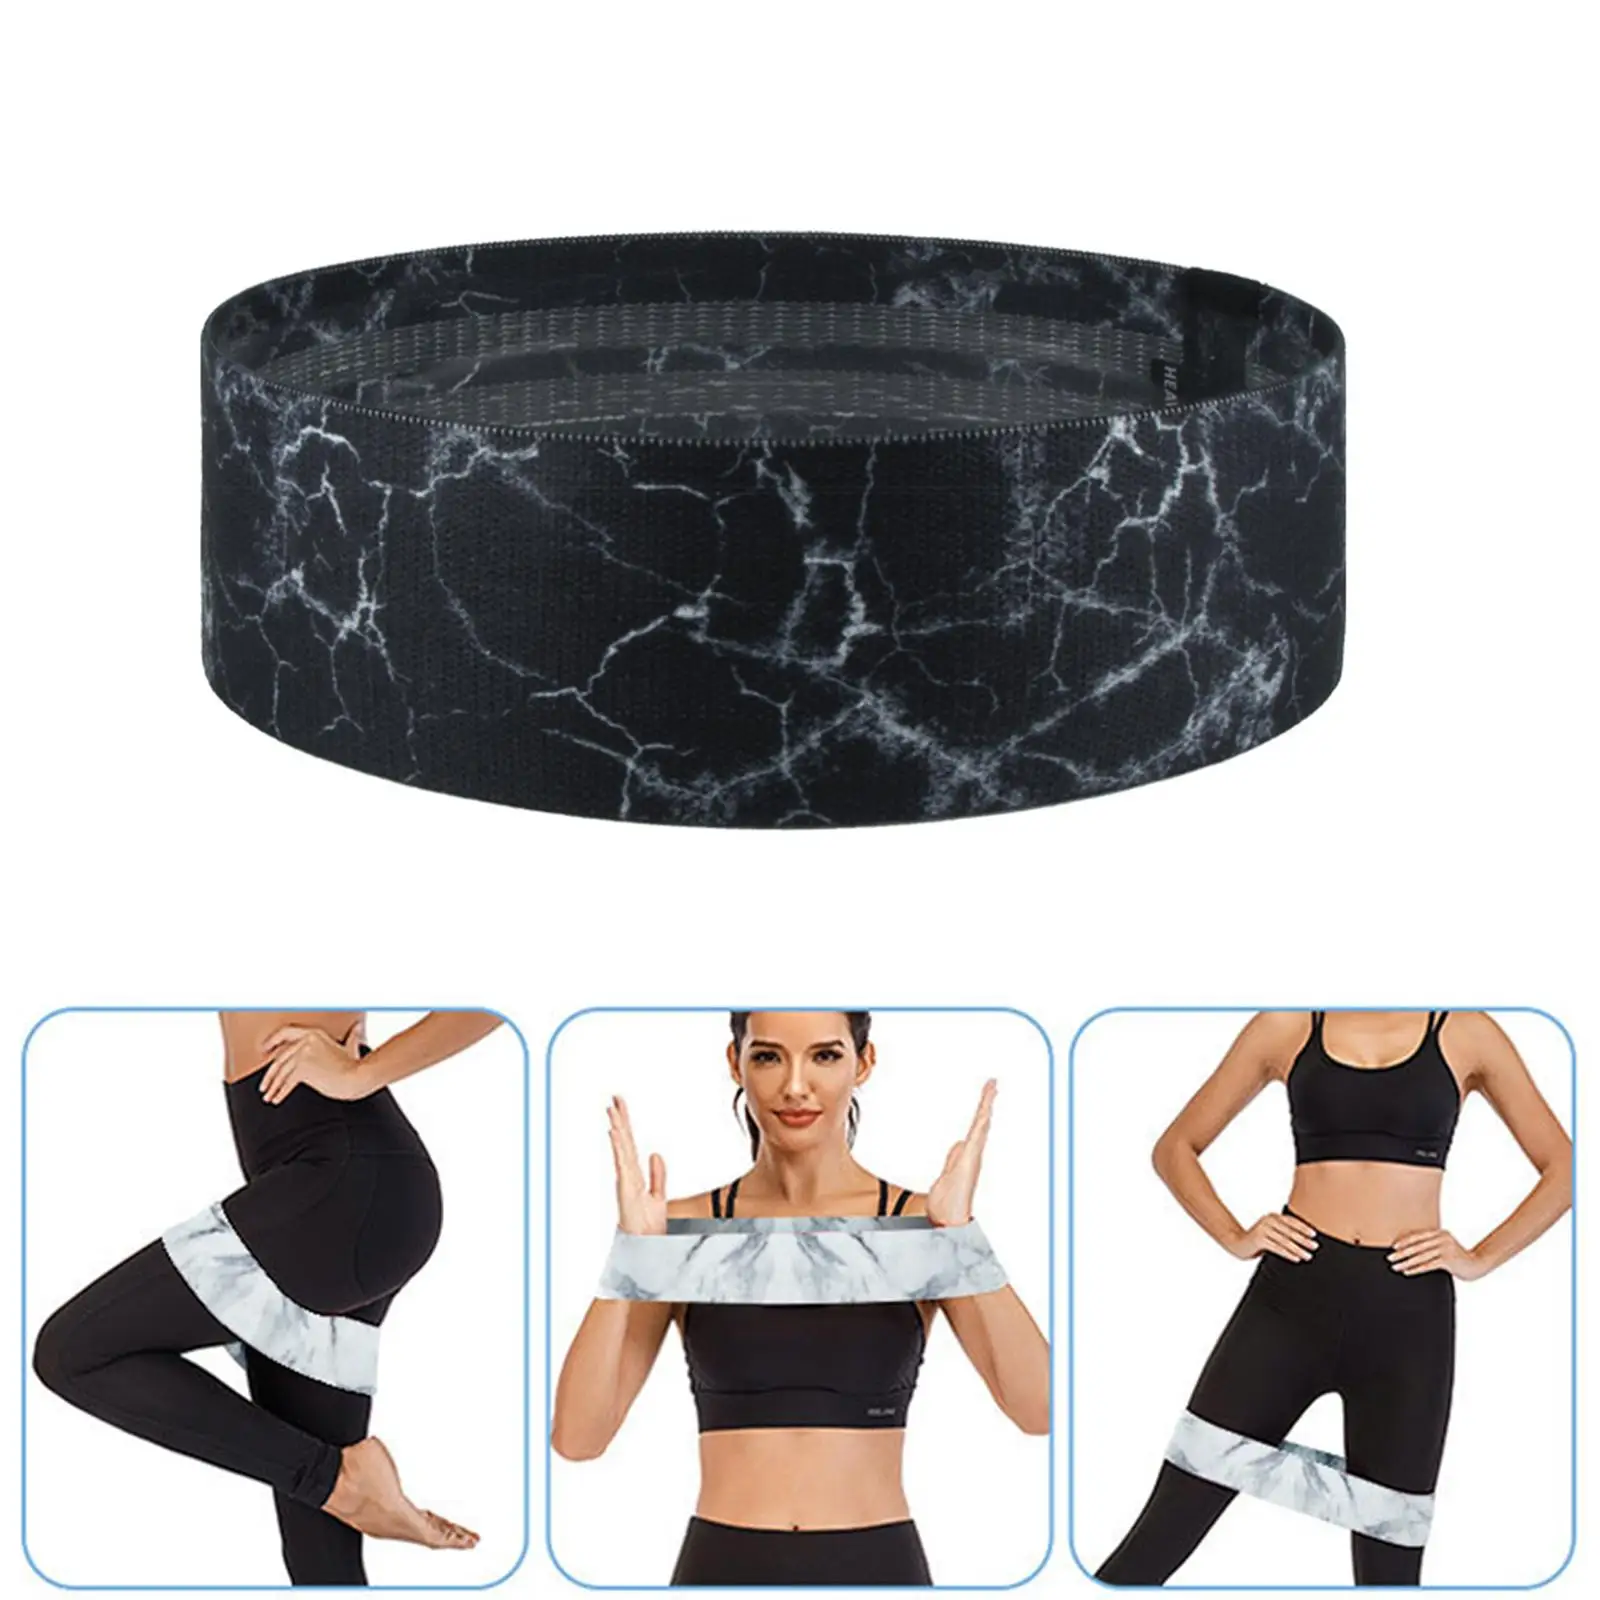 Resistance Bands Exercise Bands Non Slip Squat Bands Hip Circle Expander for Legs and Butt Glute Pilates Home Gym Women Men